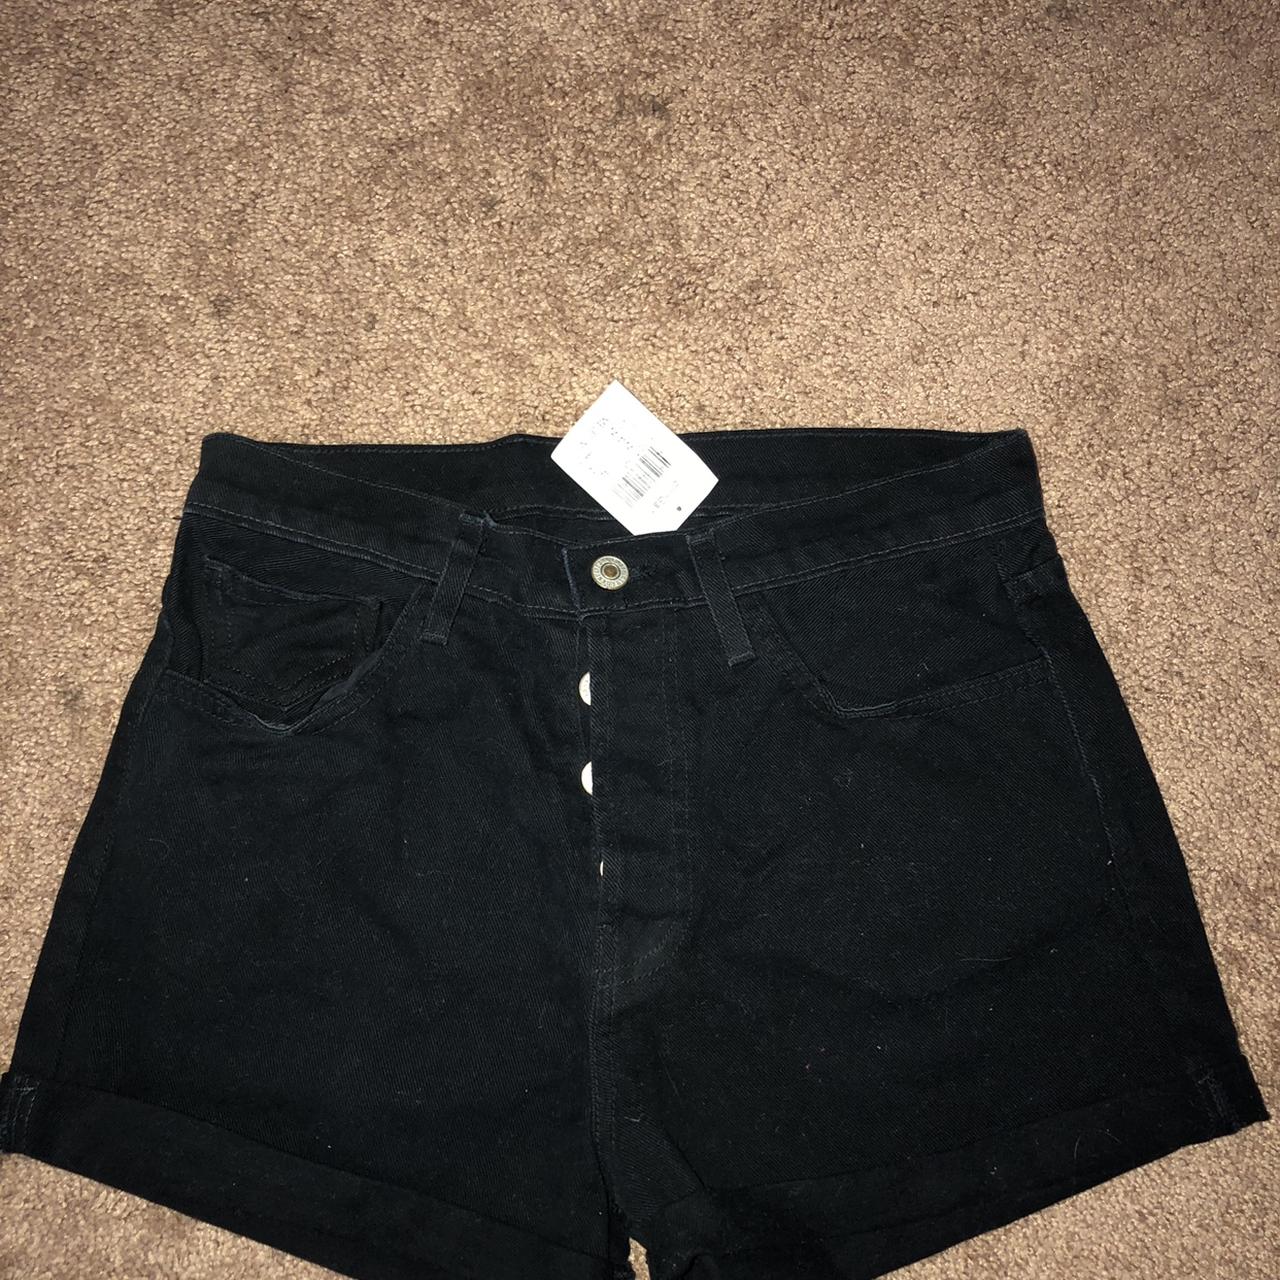 Black shorts from BRANDY MELVILLE - with pockets - Depop